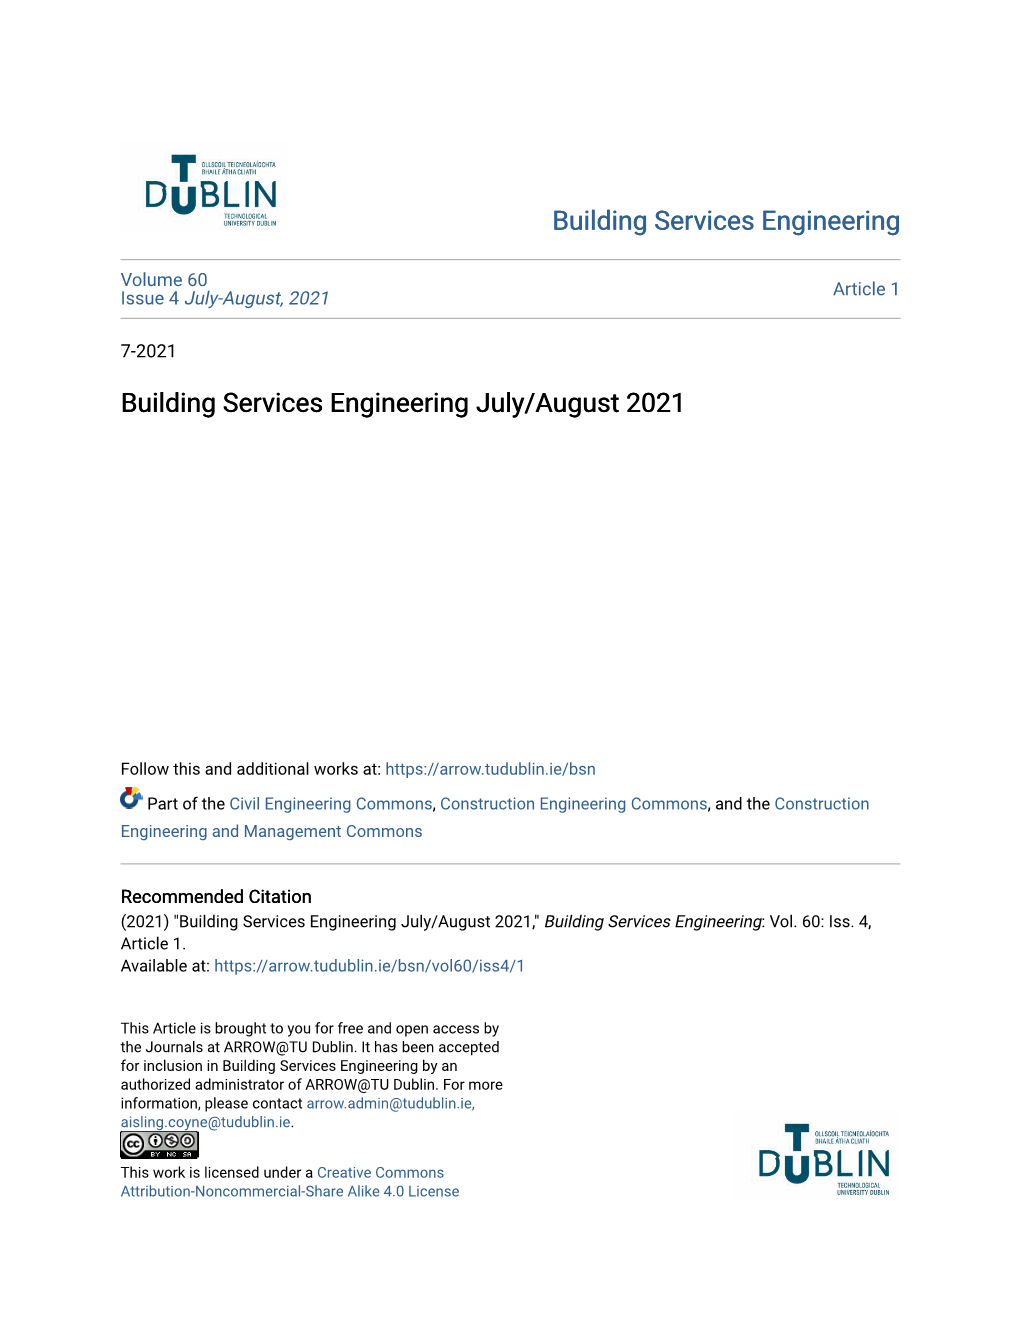 Building Services Engineering July/August 2021